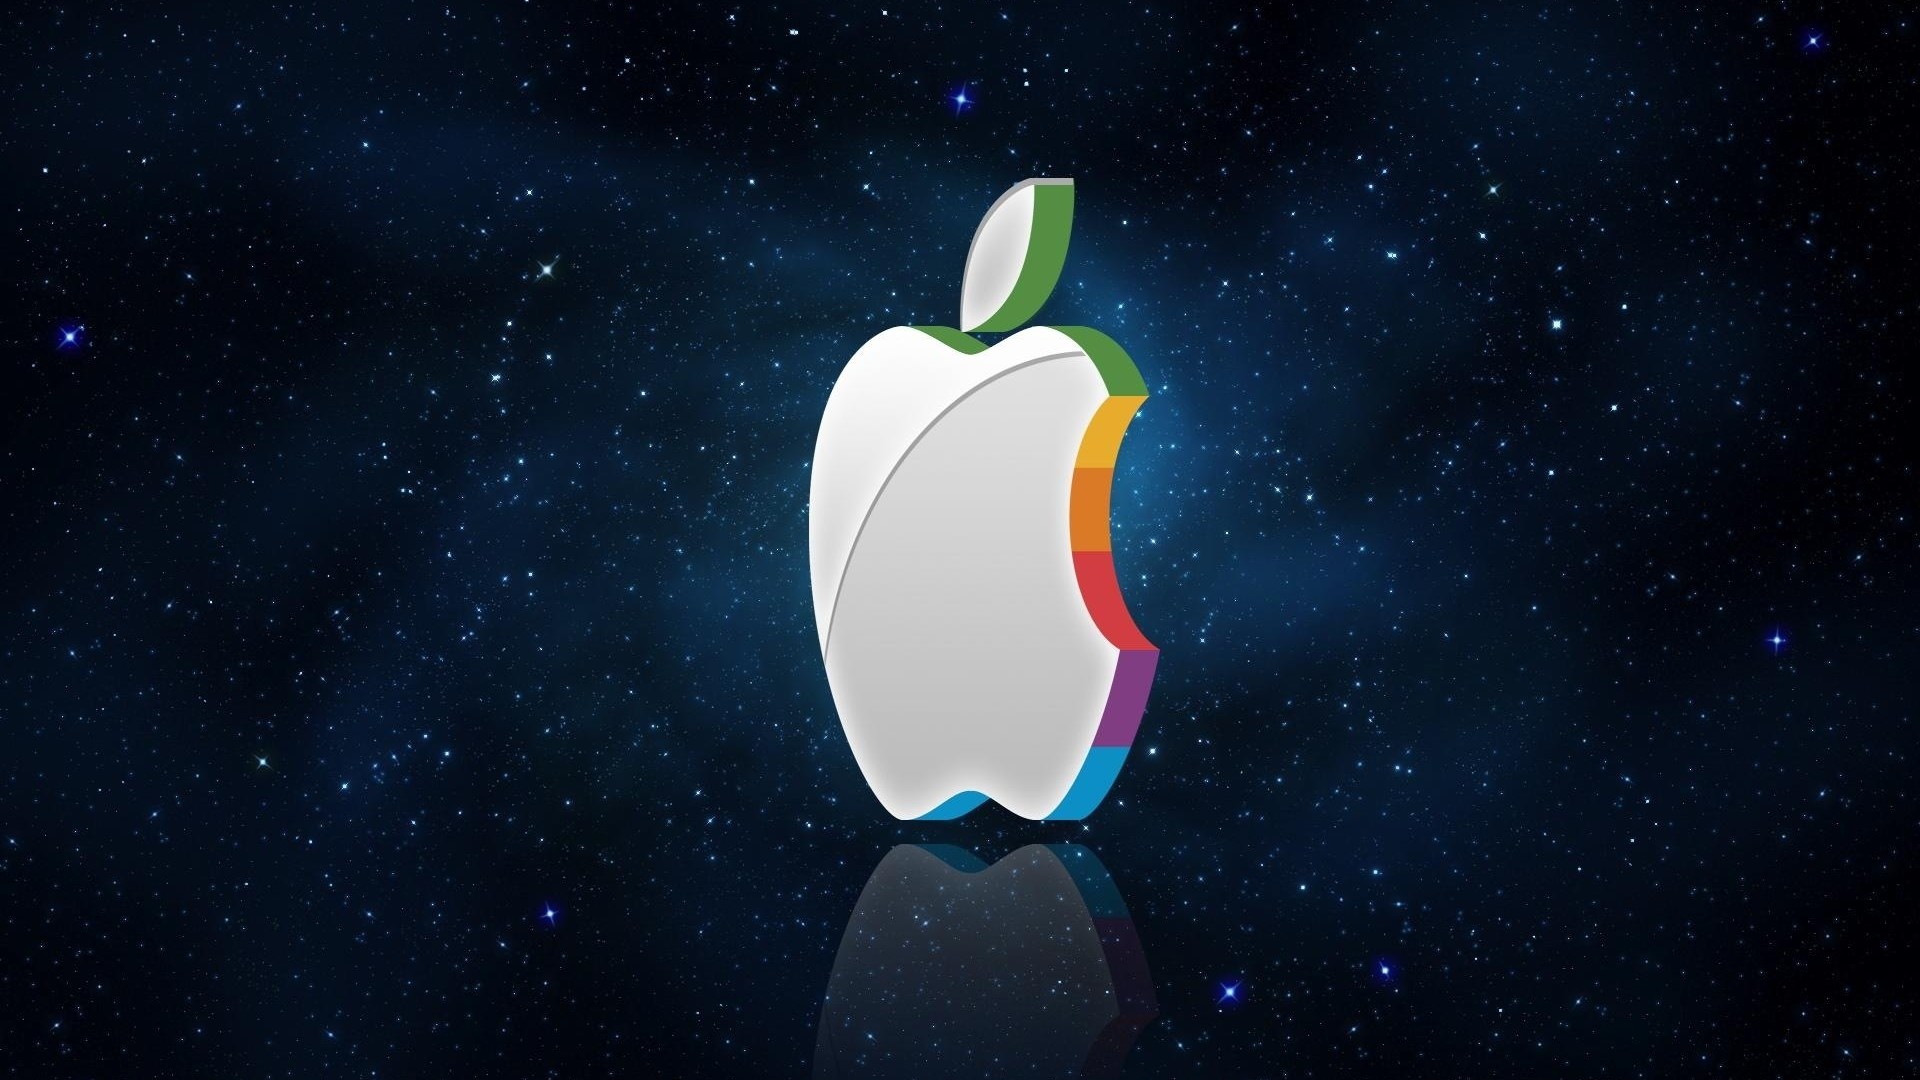 1920x1080 Awesome Macbook Air Logo Wallpapers.